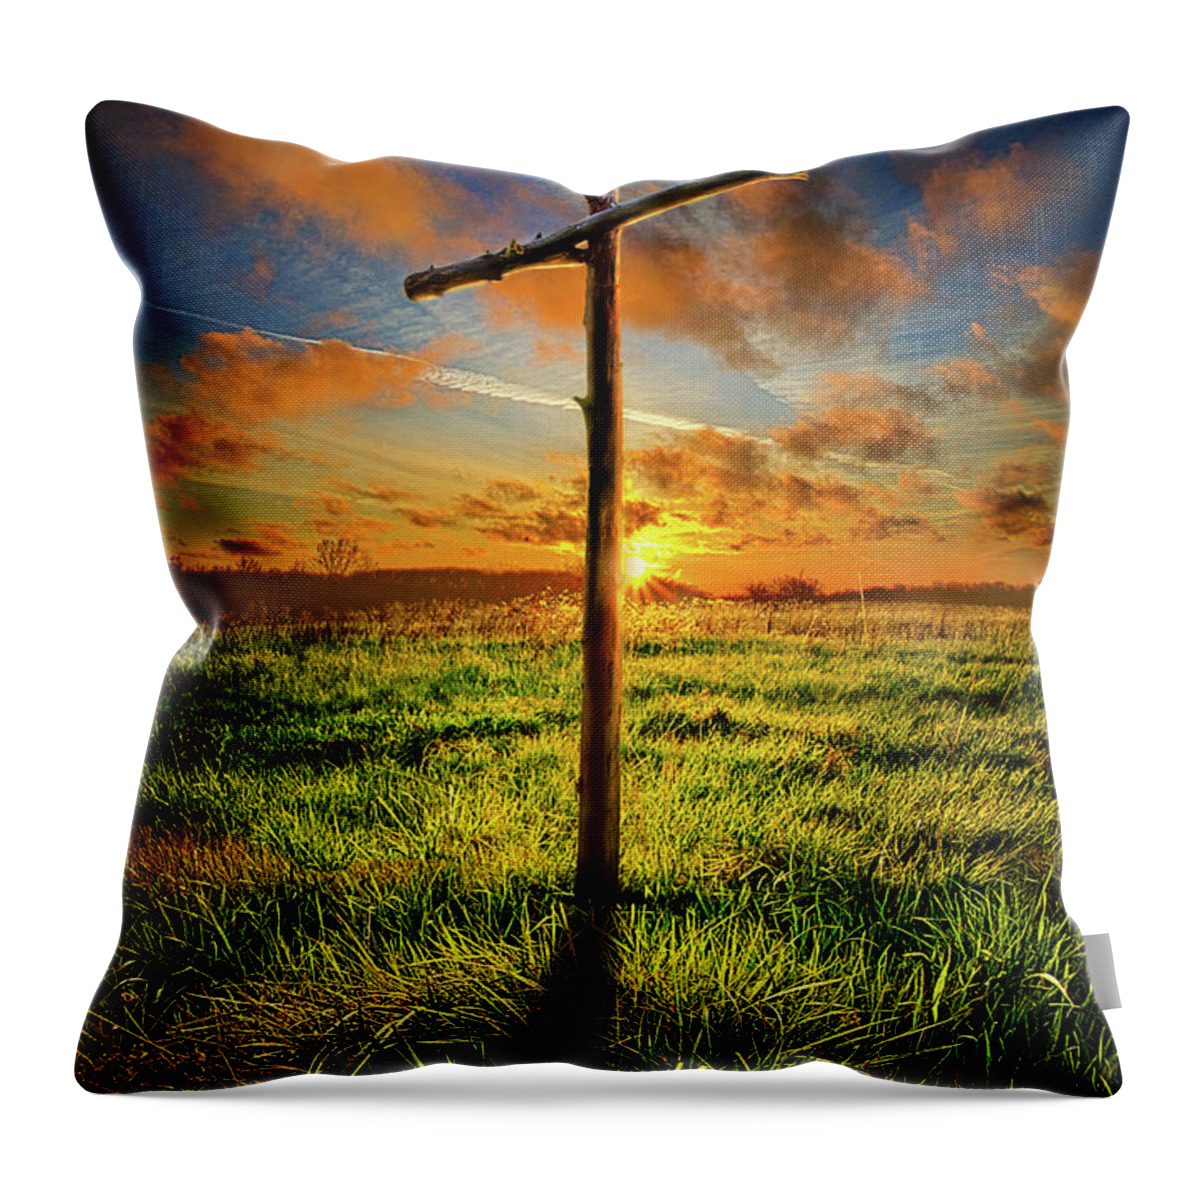 Good Friday Throw Pillow featuring the photograph Good Friday #2 by Phil Koch